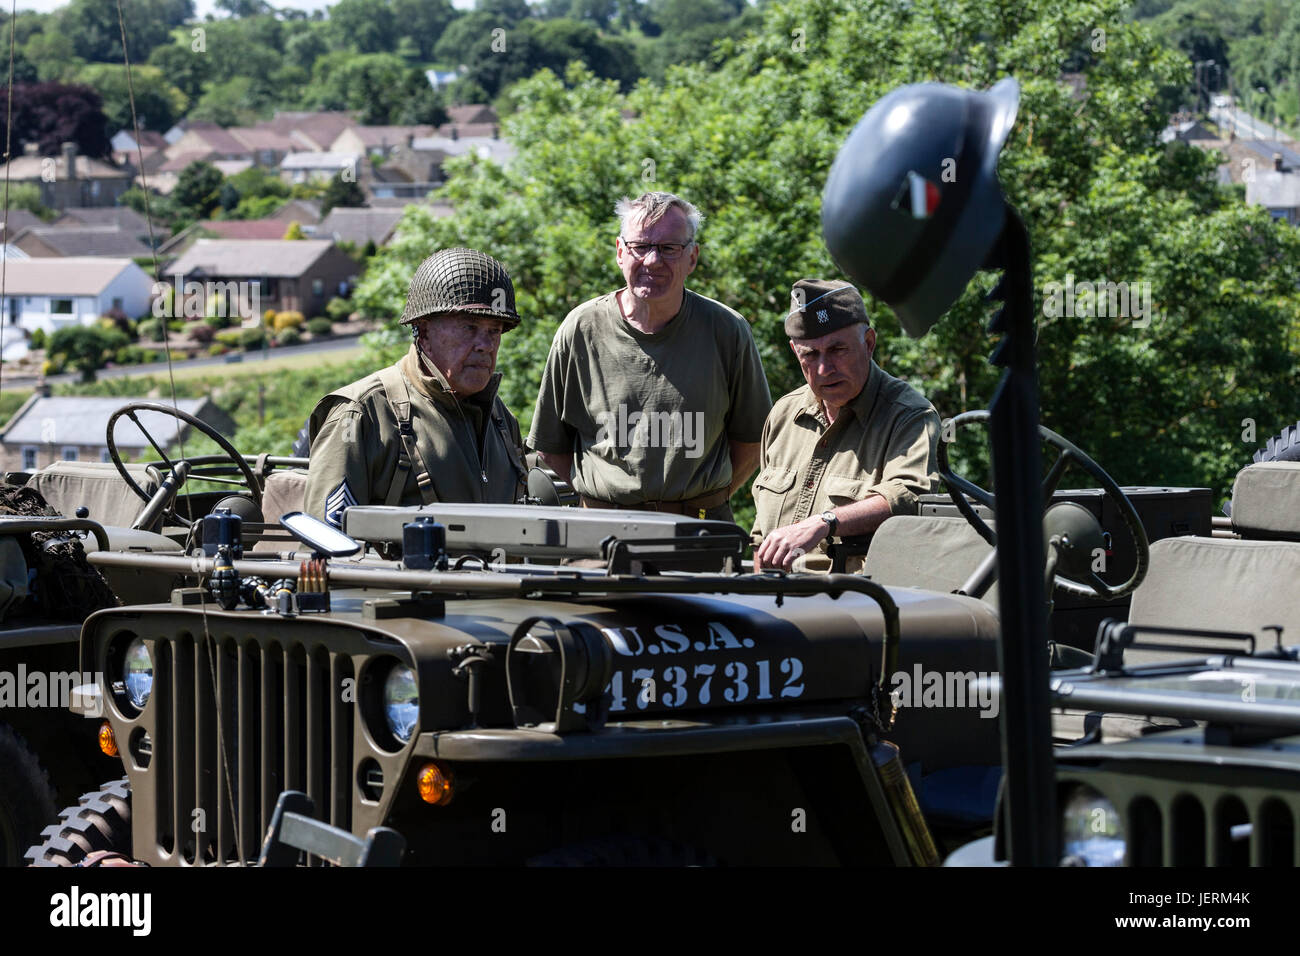 WW2 Re-Enactors Dressed in American Uniforms Next to a Willys Jeep During the 2017 Barnard Castle 1940's Weekend, County Durham, UK. Stock Photo